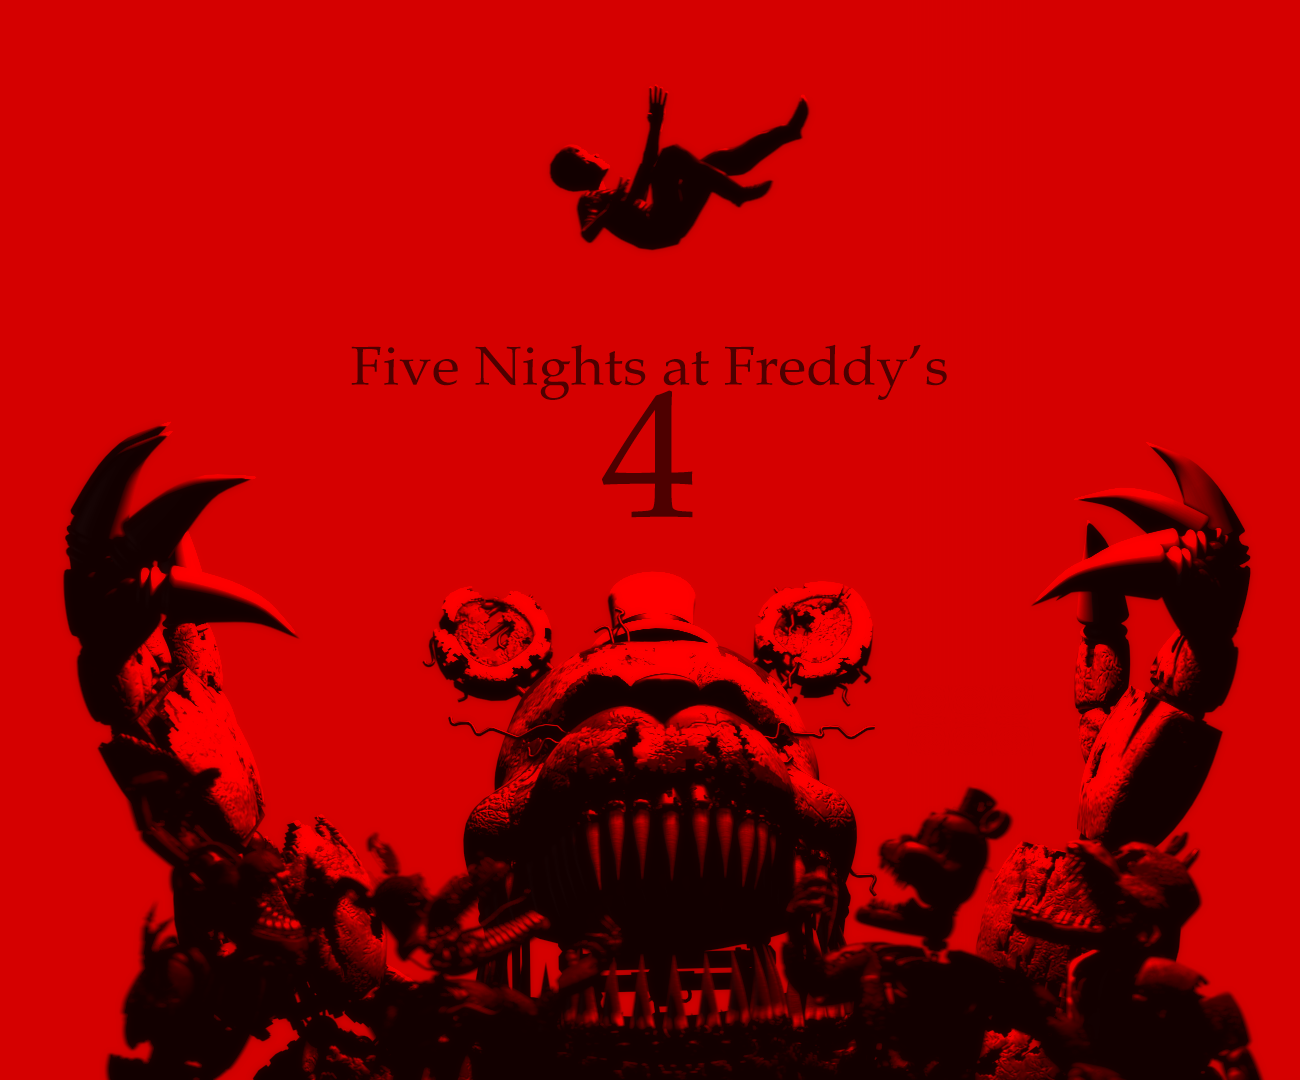 Five Nights at Freddy's 4 2nd Anniversary. by Fer-Ge on DeviantArt